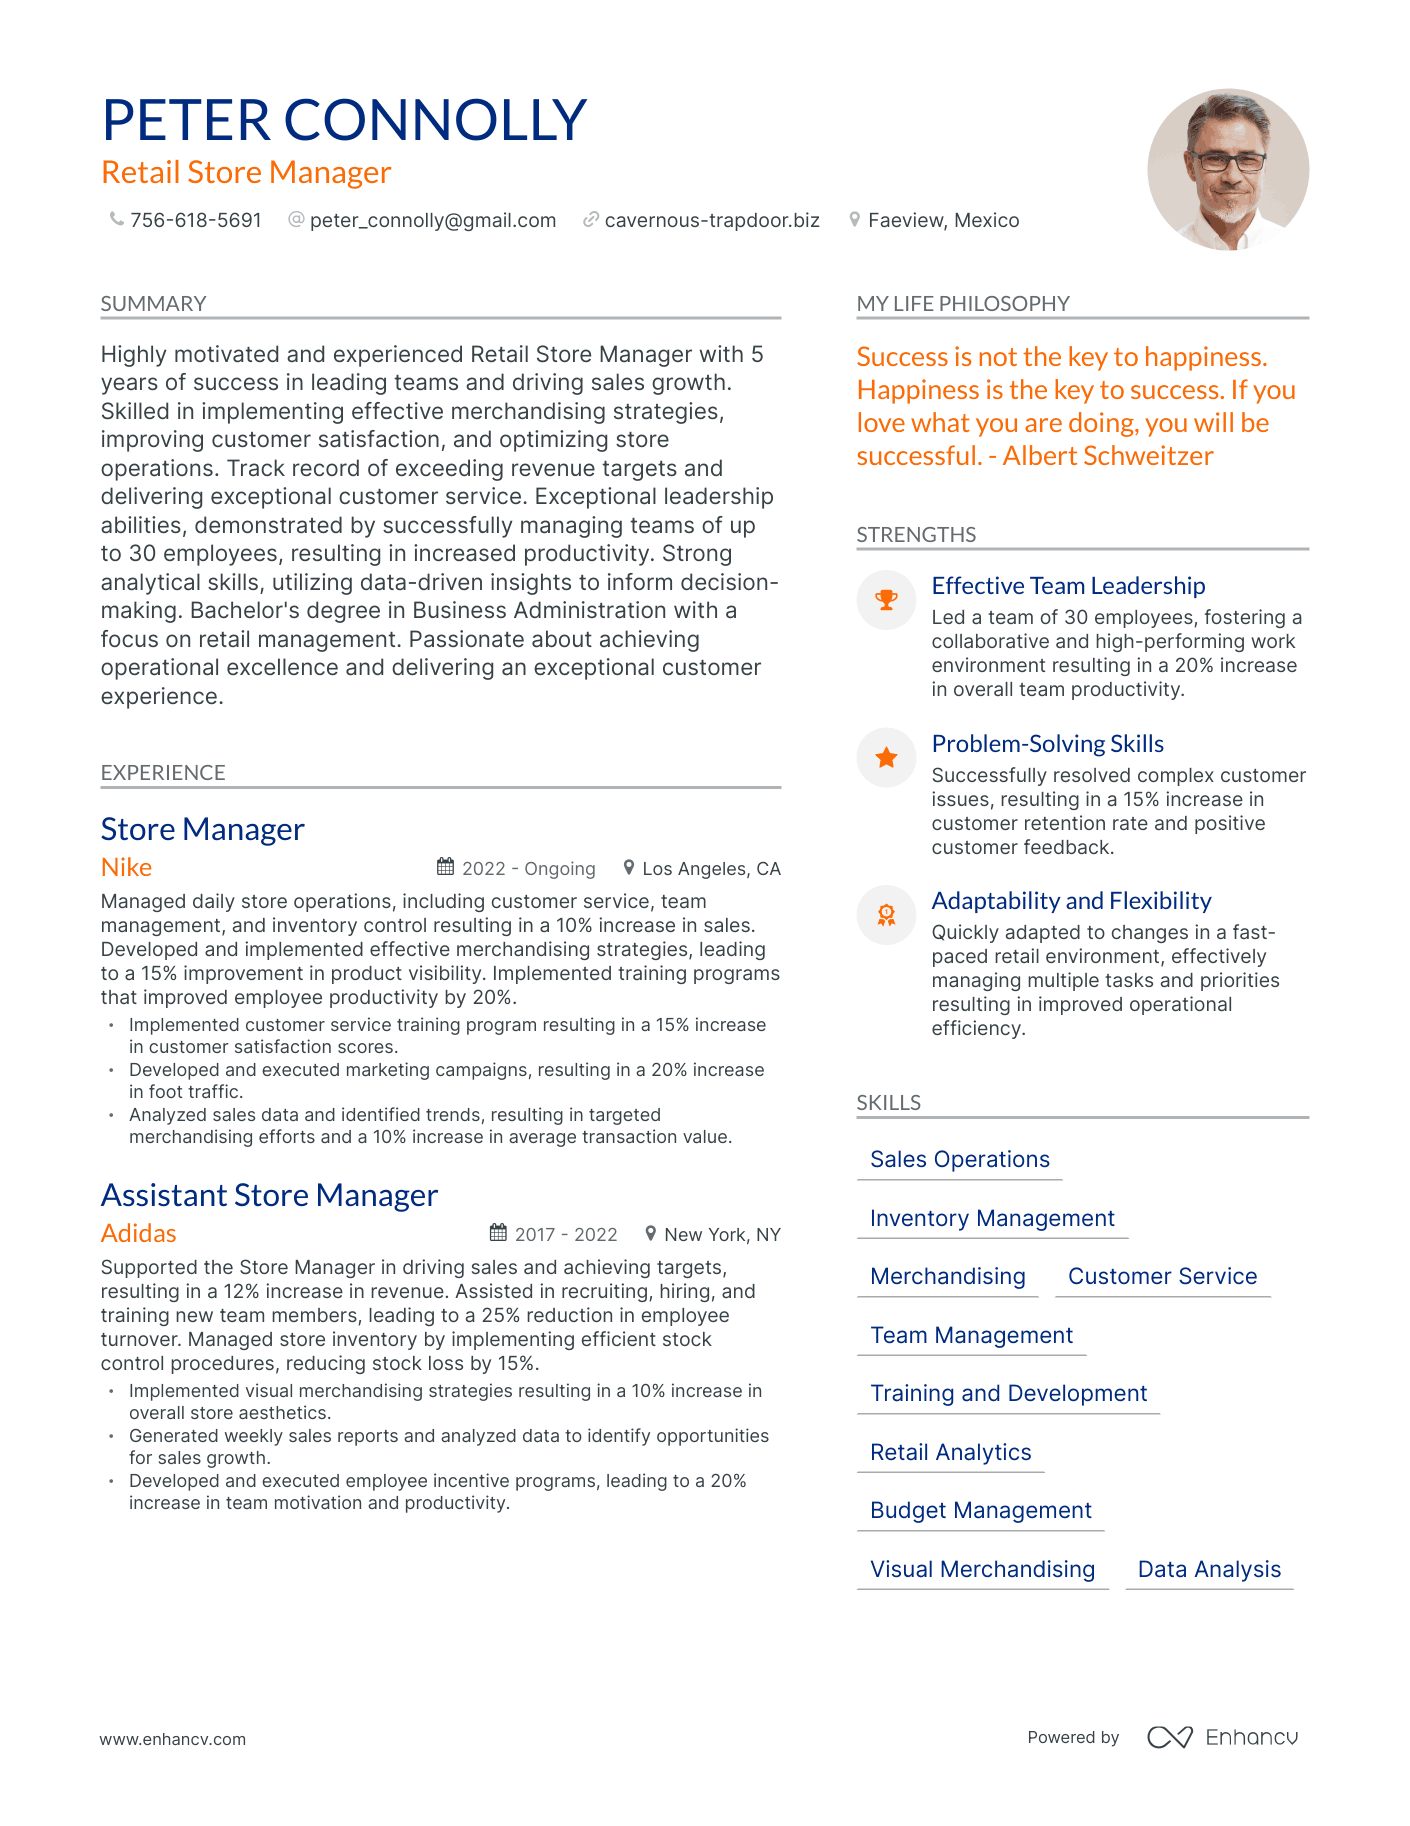 Retail Store Manager resume example